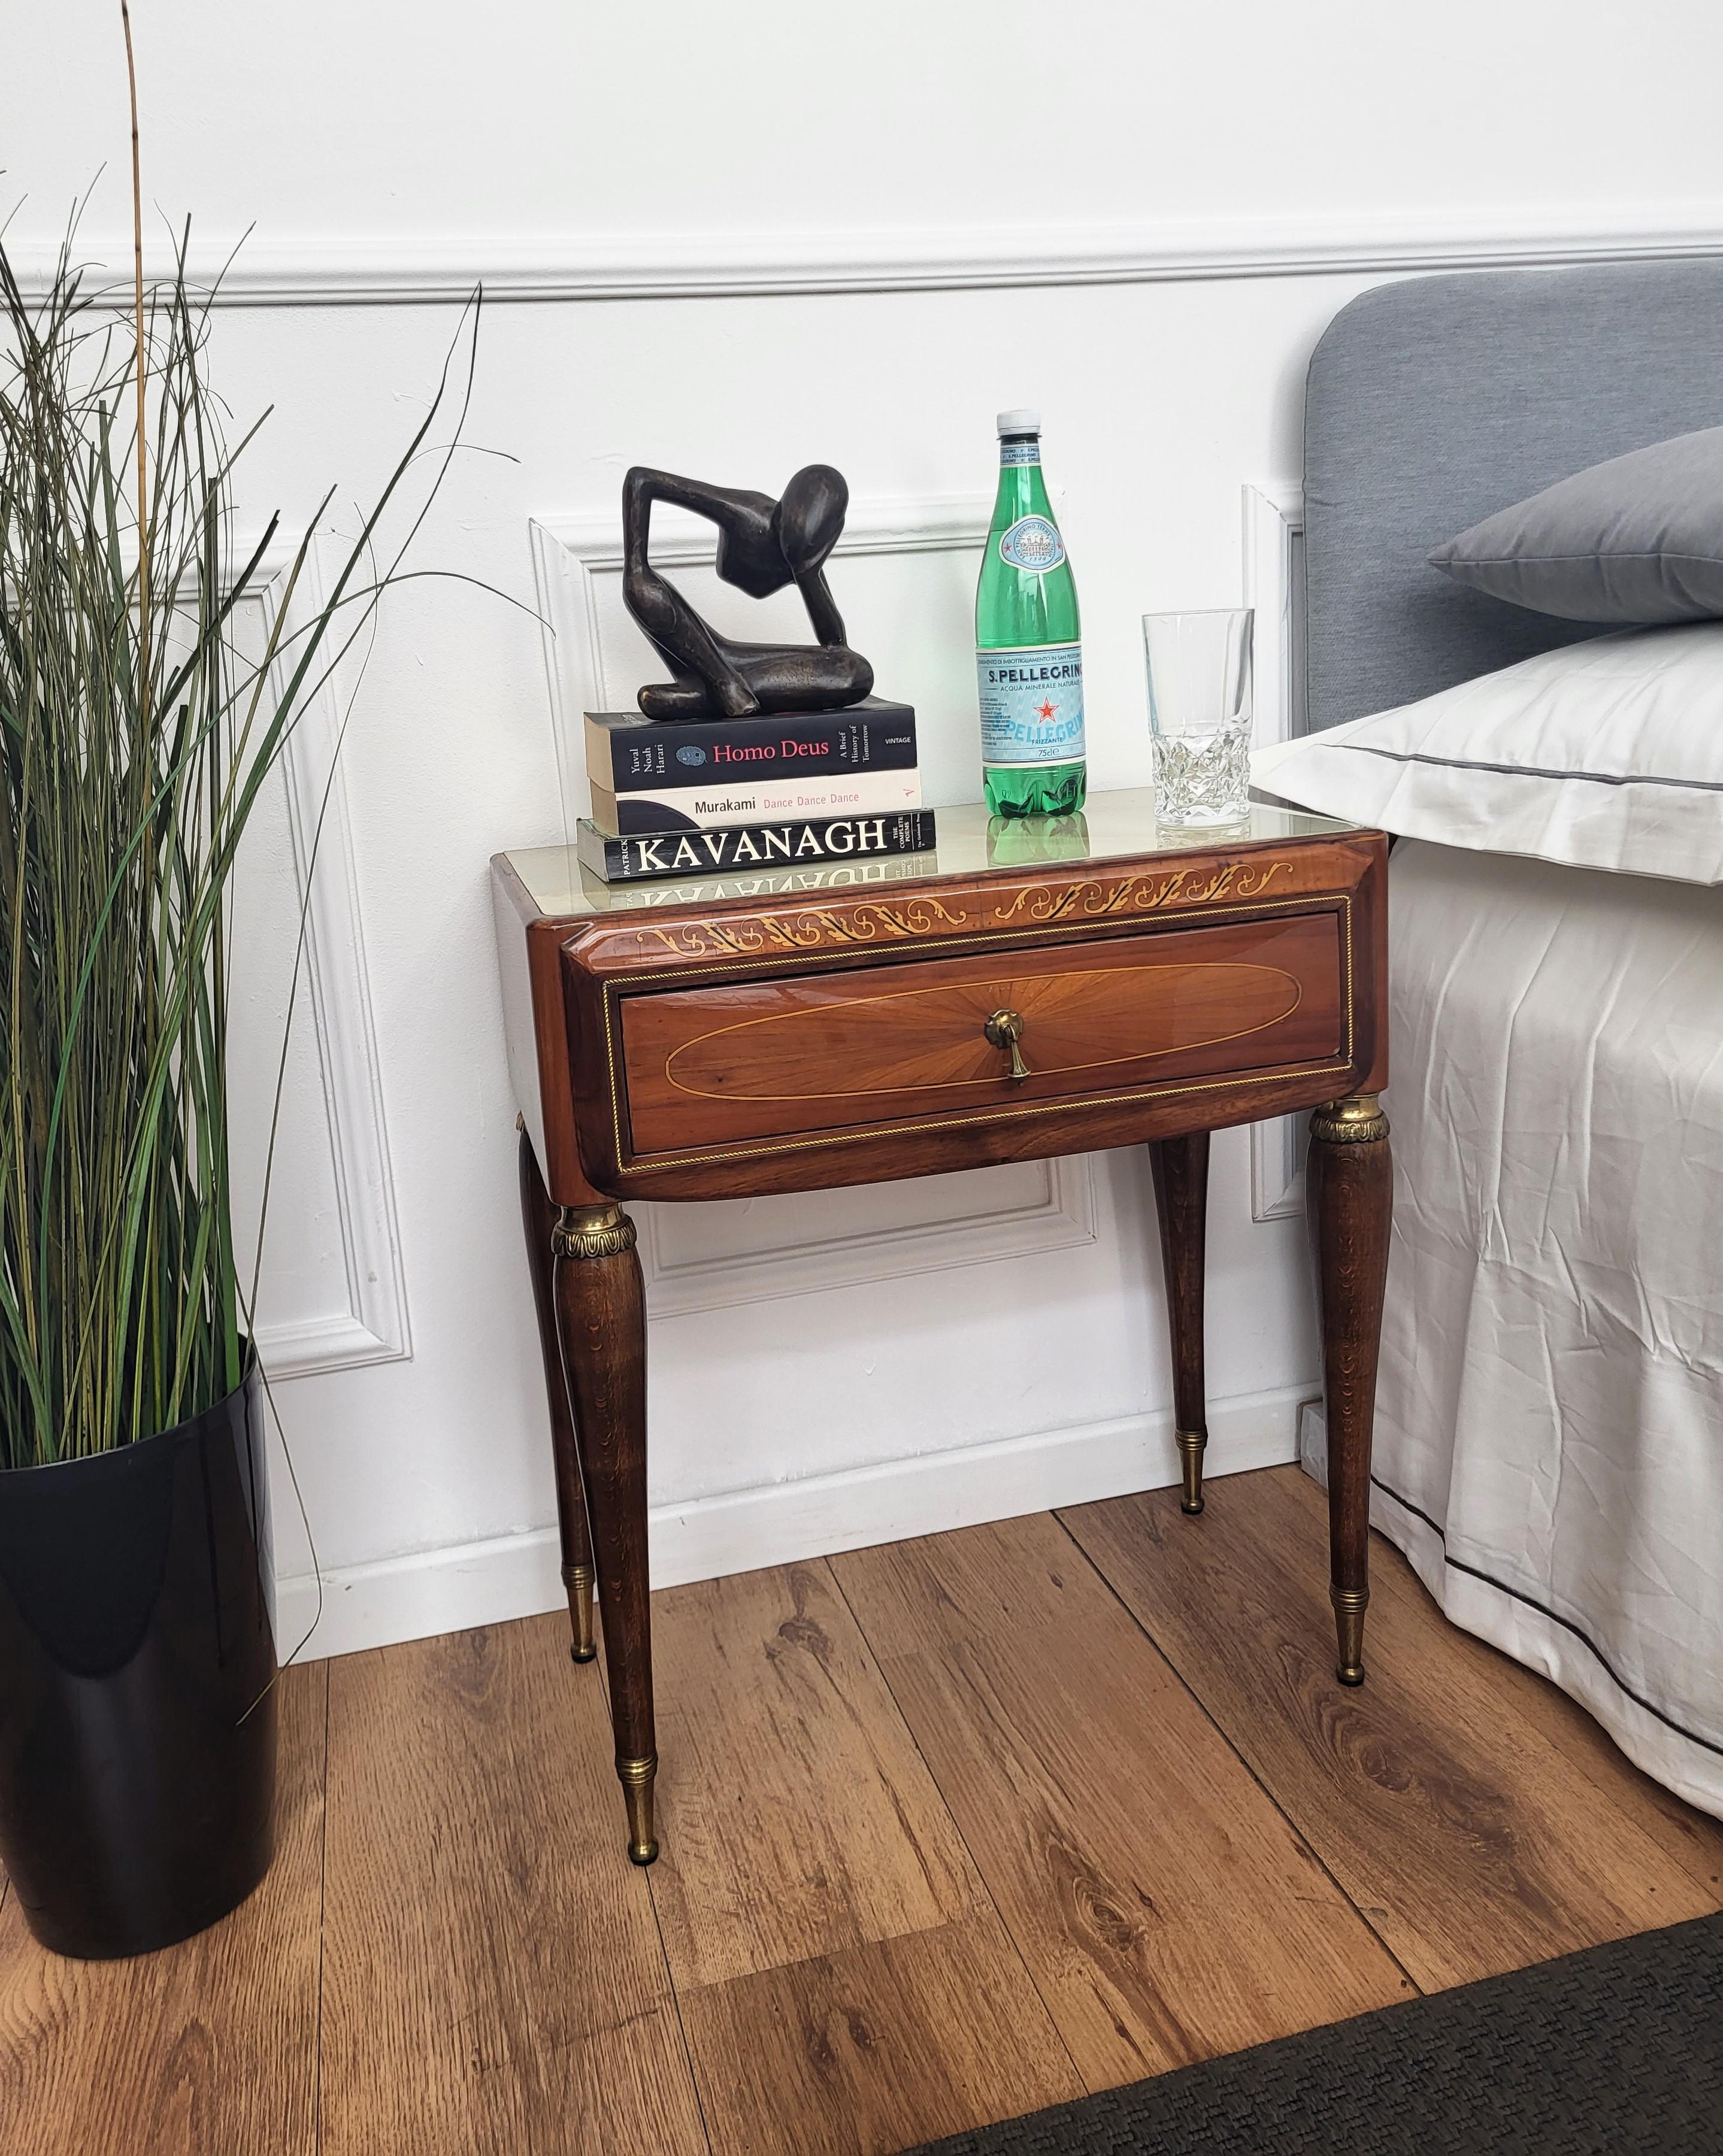 Very elegant and refined Italian 1950s neoclassical pair of bedside tables with inlay walnut veneer wood, drawer with brass handle, brown legs with brass final and lacquered glass top. Those nightstands make a great look in any style bedroom, as a